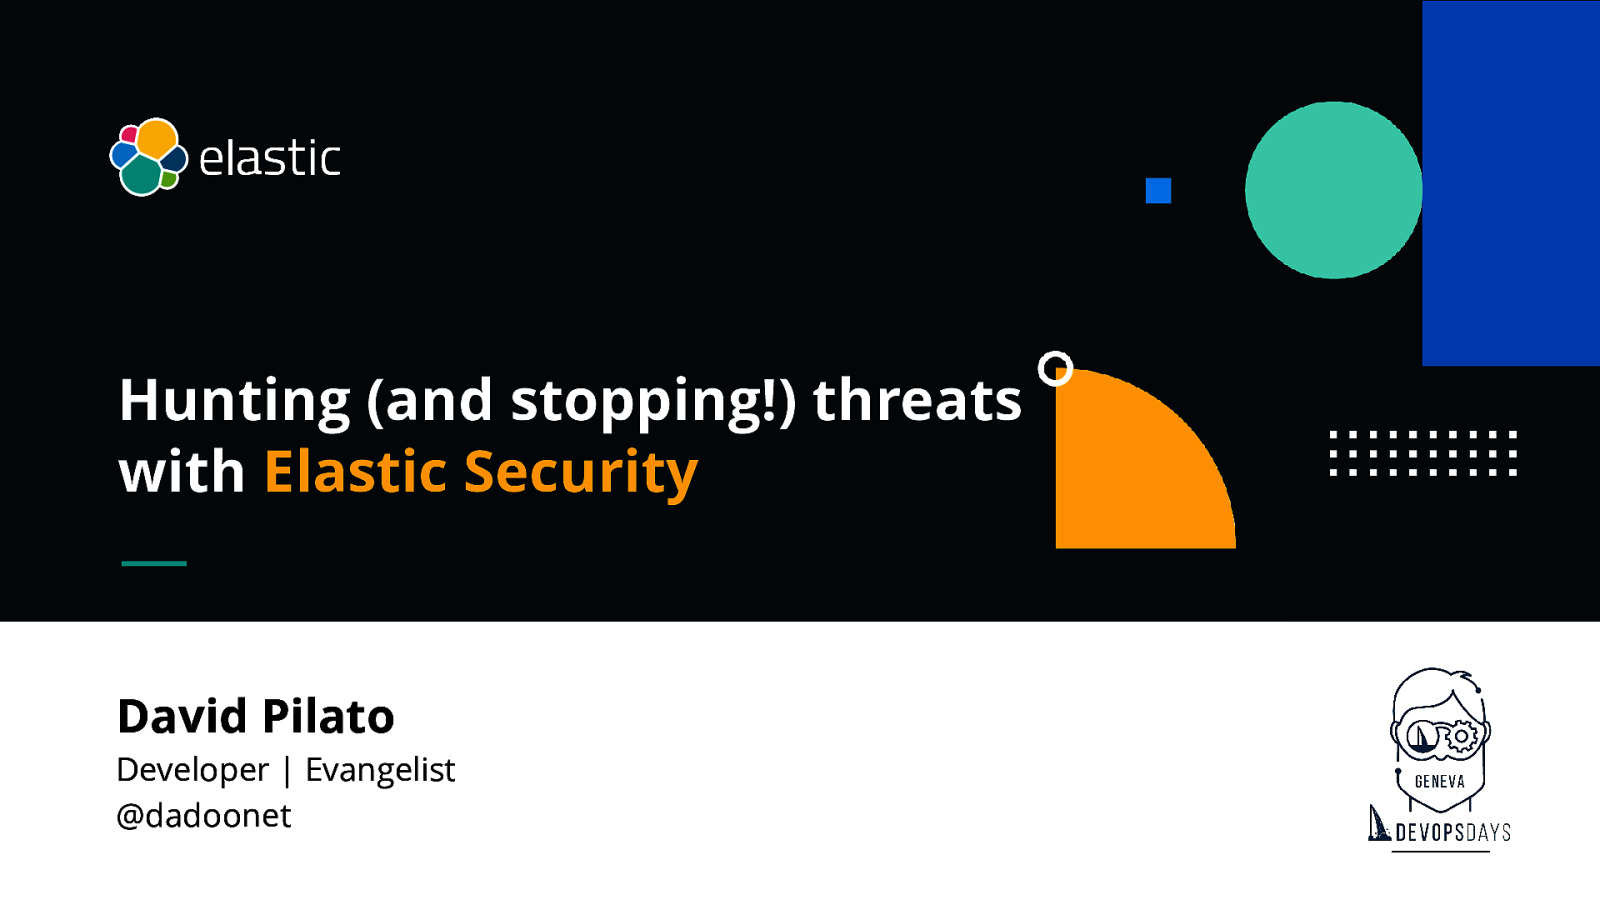 Hunting (and stopping!) threats with Elastic Security